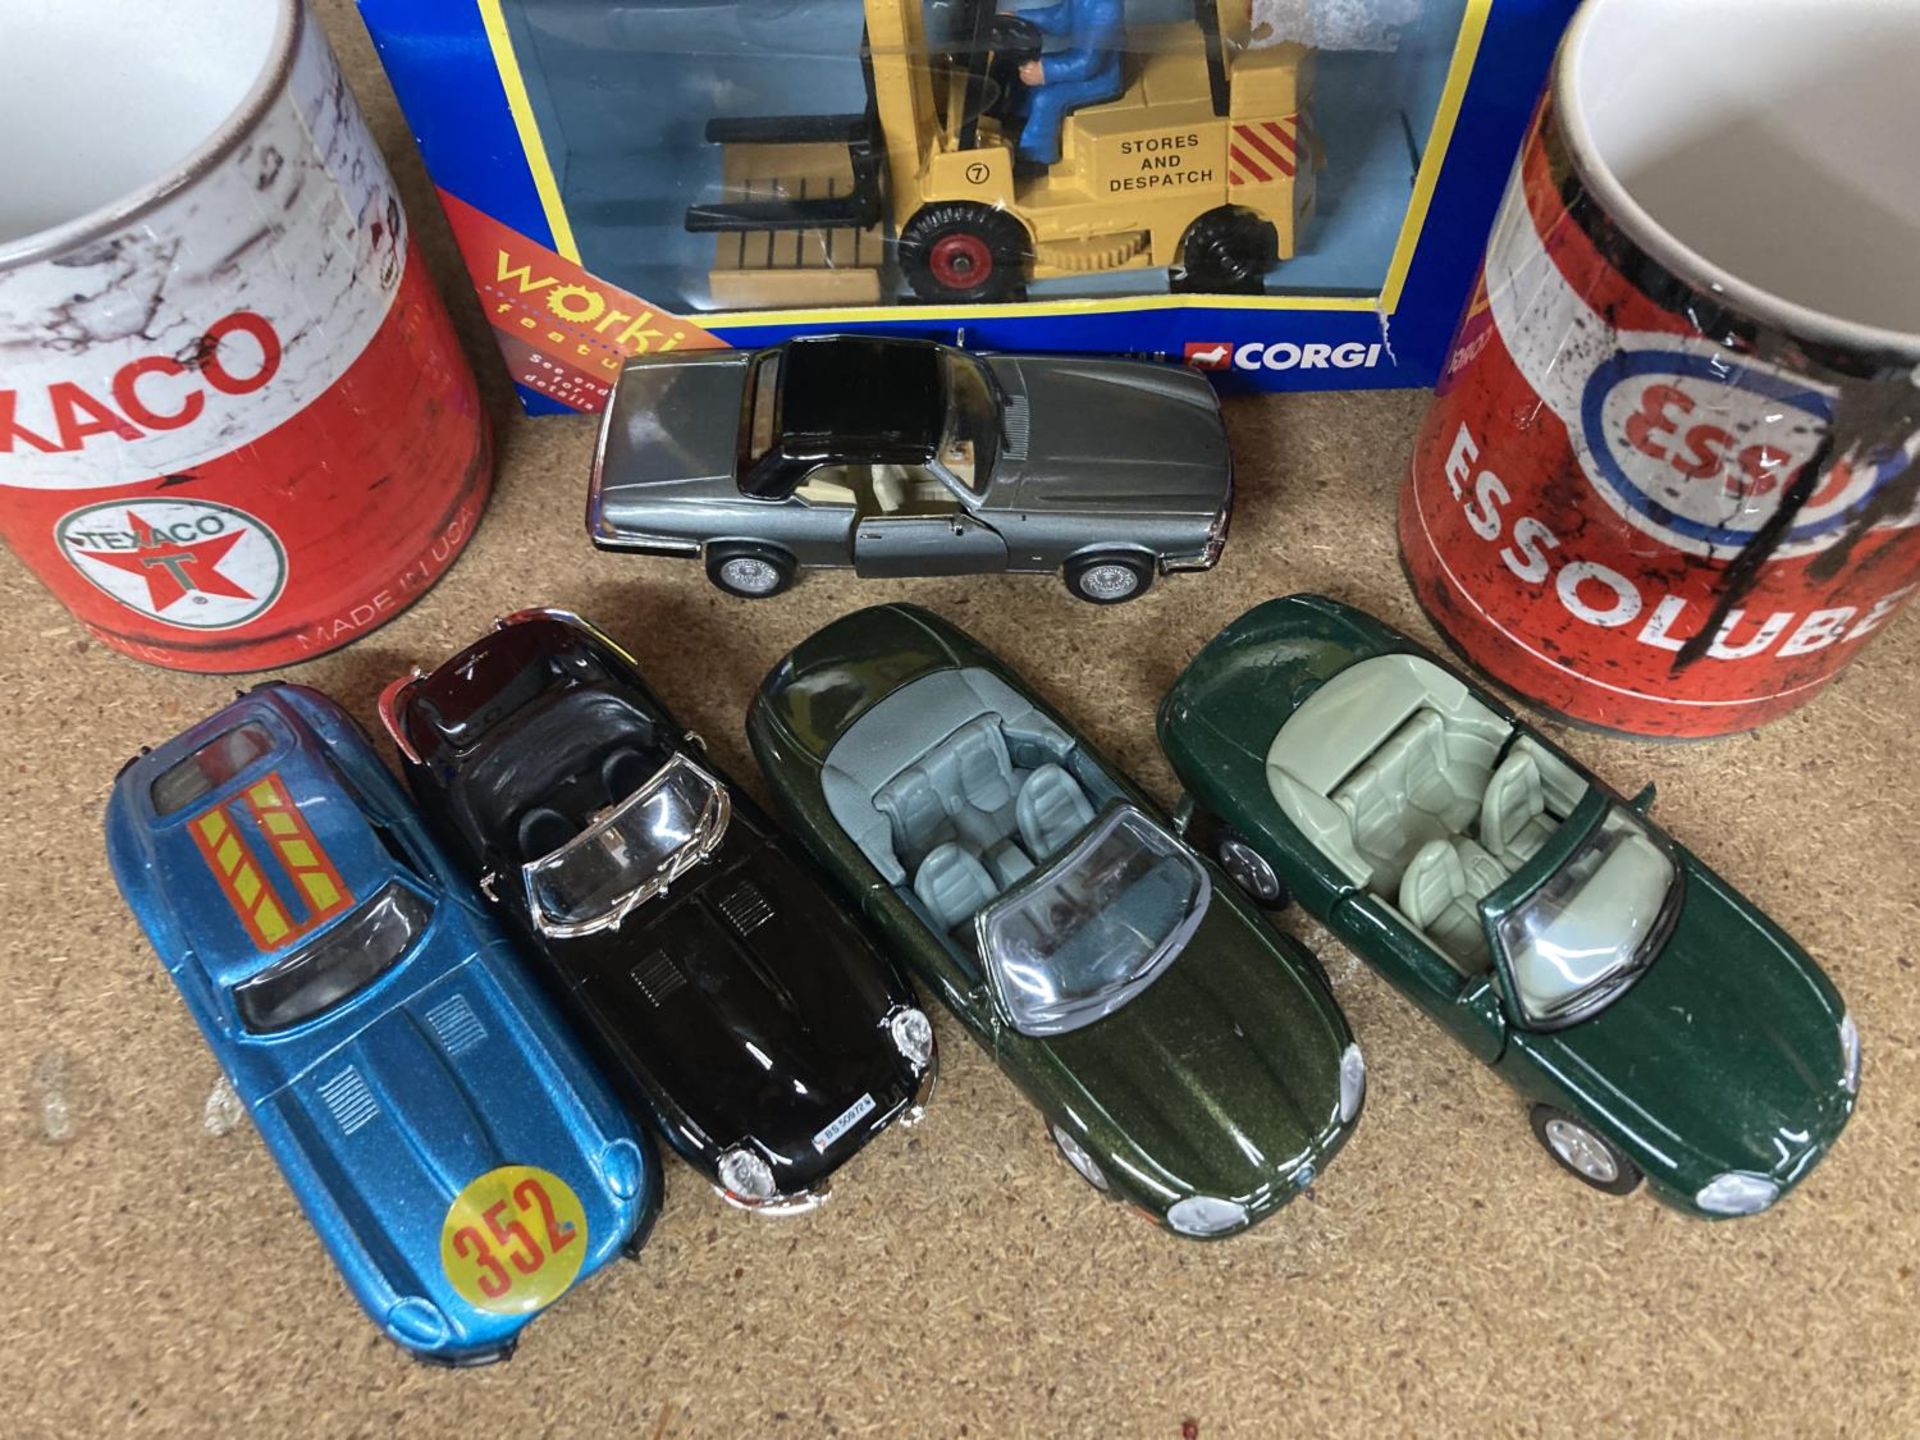 TWO BOXED CORGI MODELS - A FORKLIFT TRUCK AND A BUS, A TEXACO AND ESSO MUG PLUS FIVE DIECAST CARS - Image 9 of 10